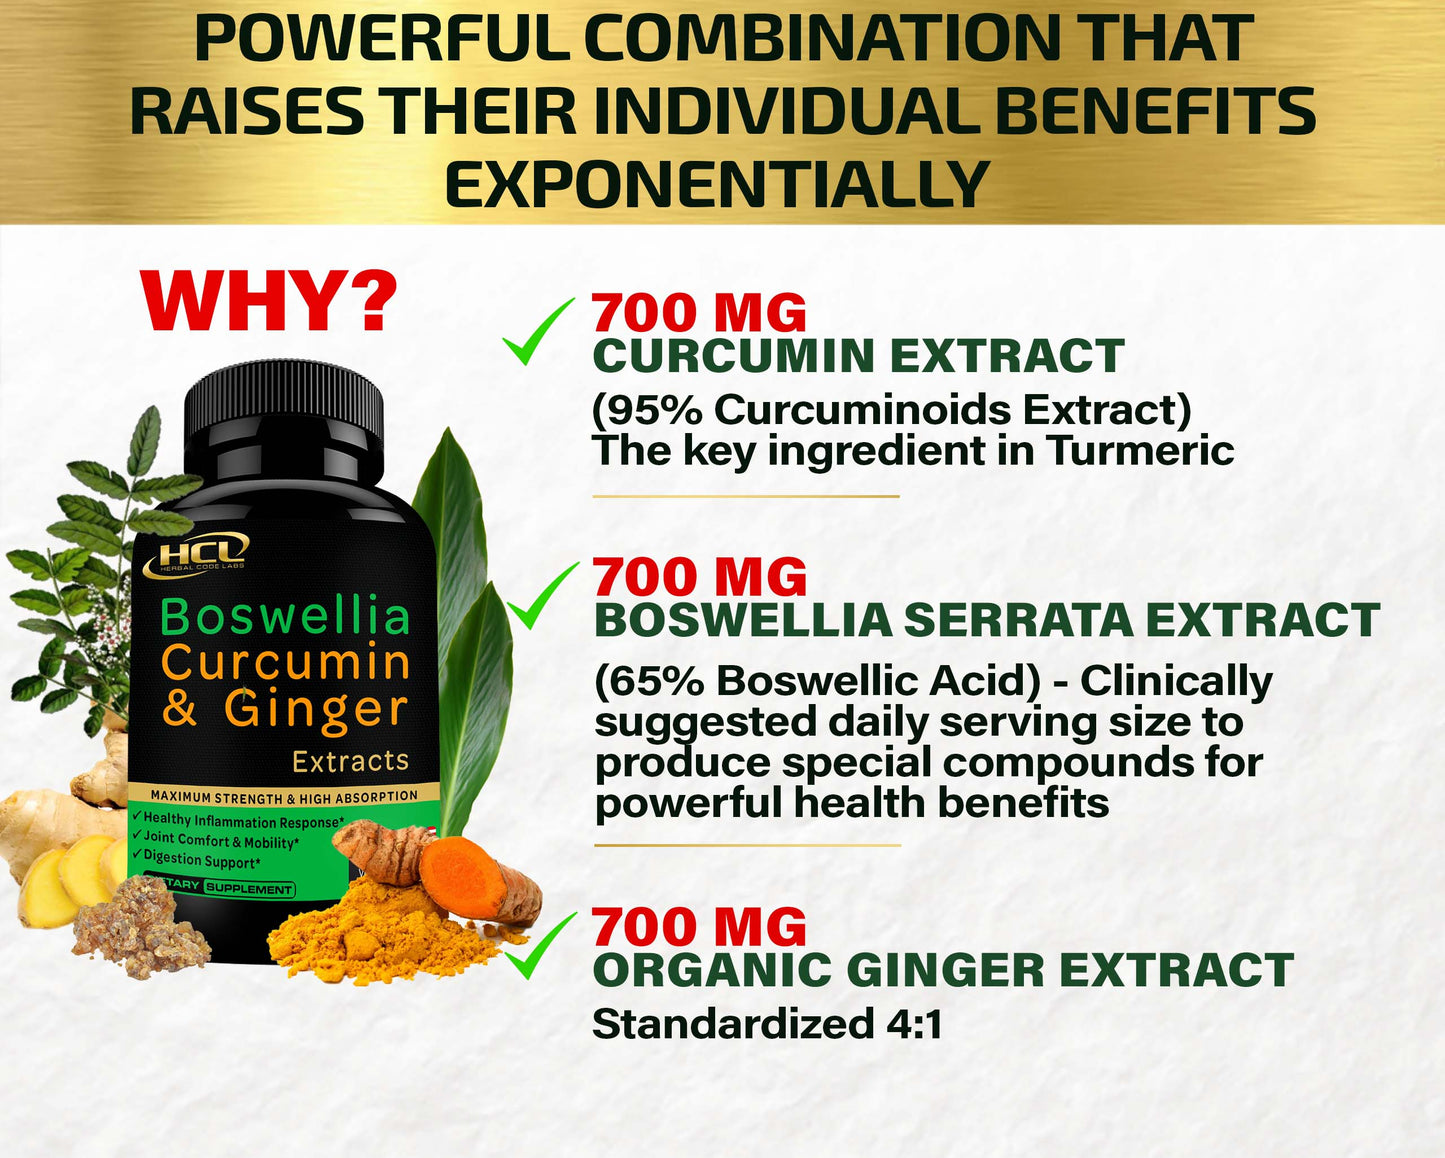 Boswellia Curcumin Ginger Extracts